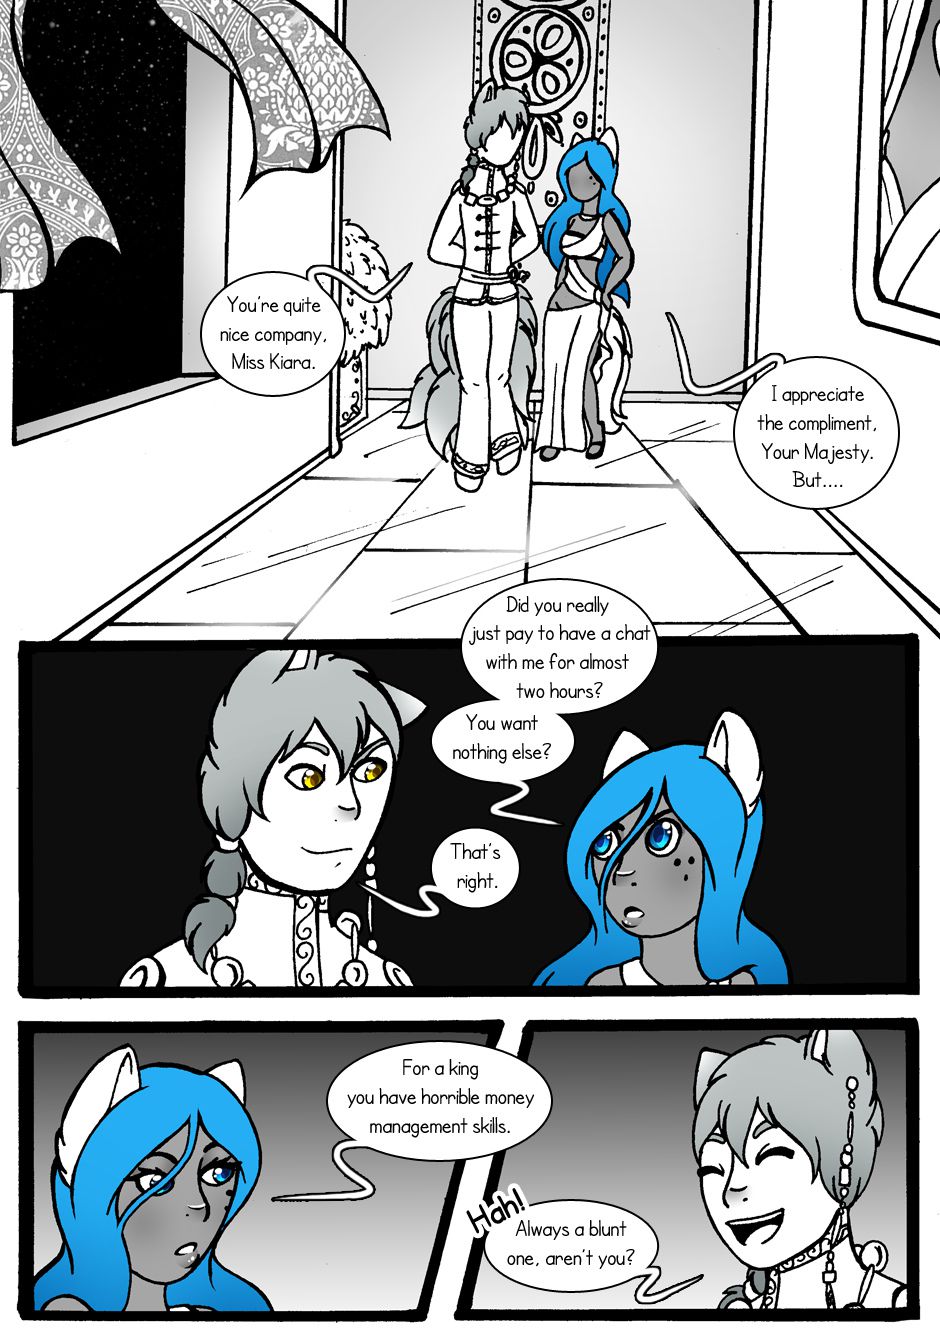 [Jeny-jen94] Between Kings and Queens [Ongoing] 43